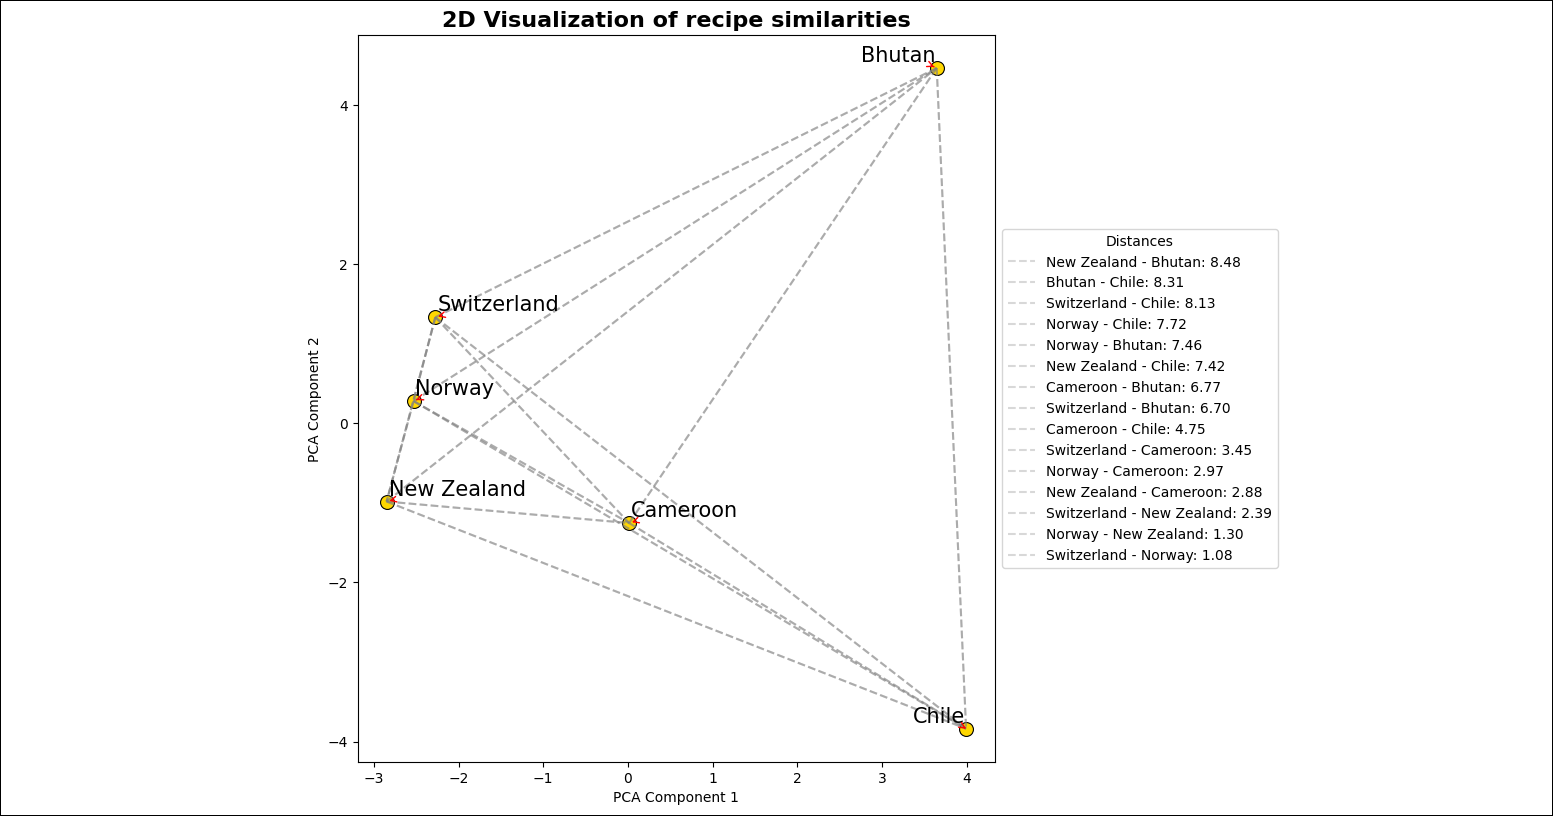 Screenshot of the image created by the plot_embeddings task showing the two dimensional representation of the closeness of recipes associated with different countries.